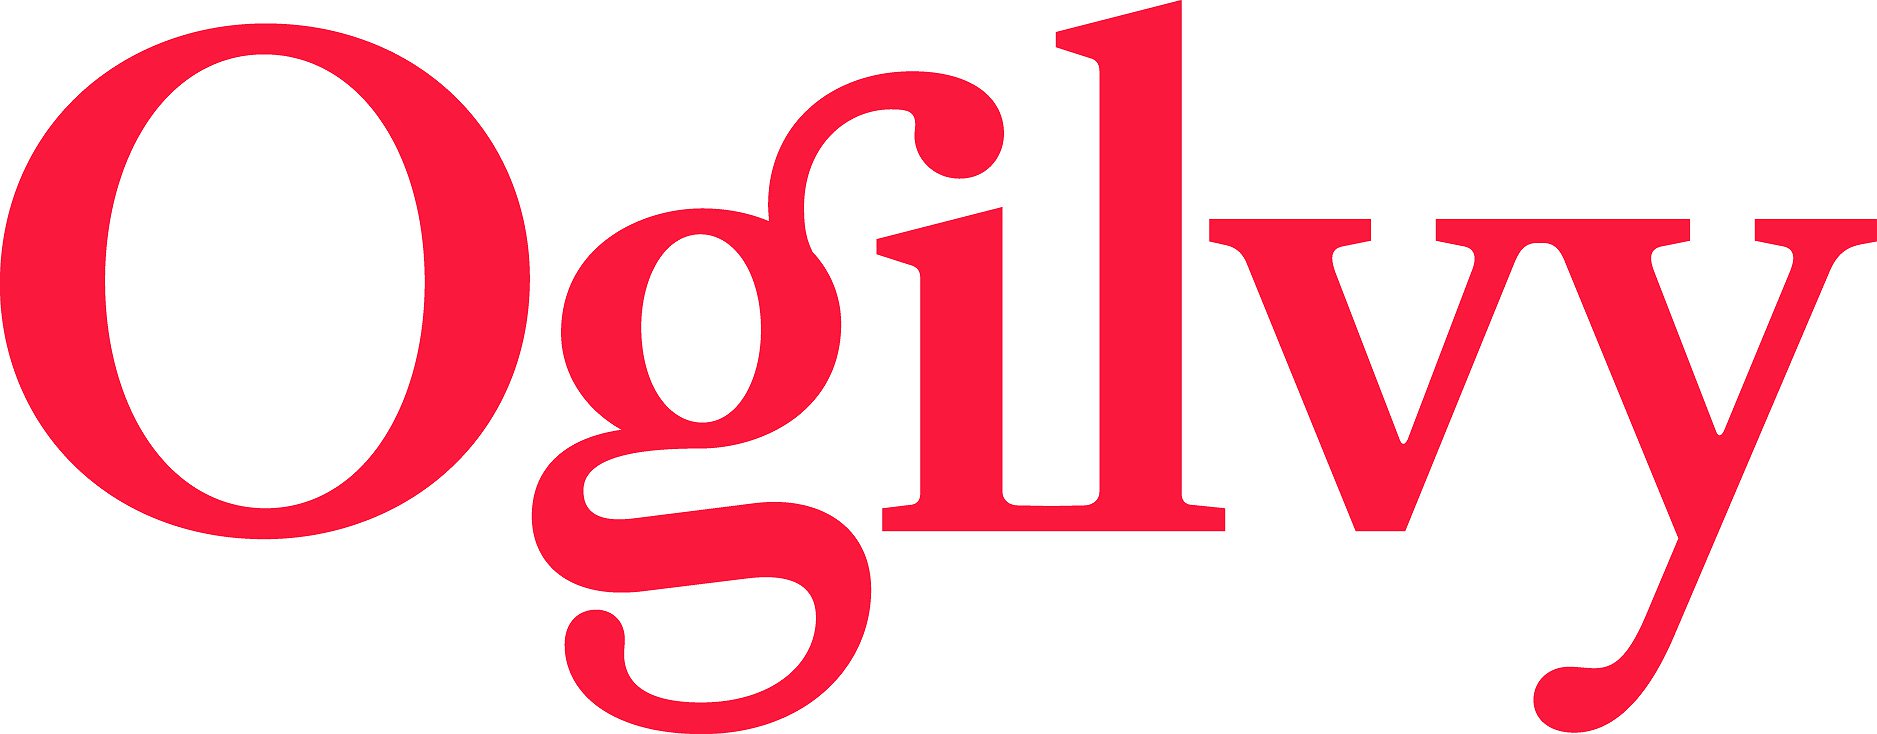 Ogilvy's event - London: Ogilvy, Advertising and Marketing Work Experience Day